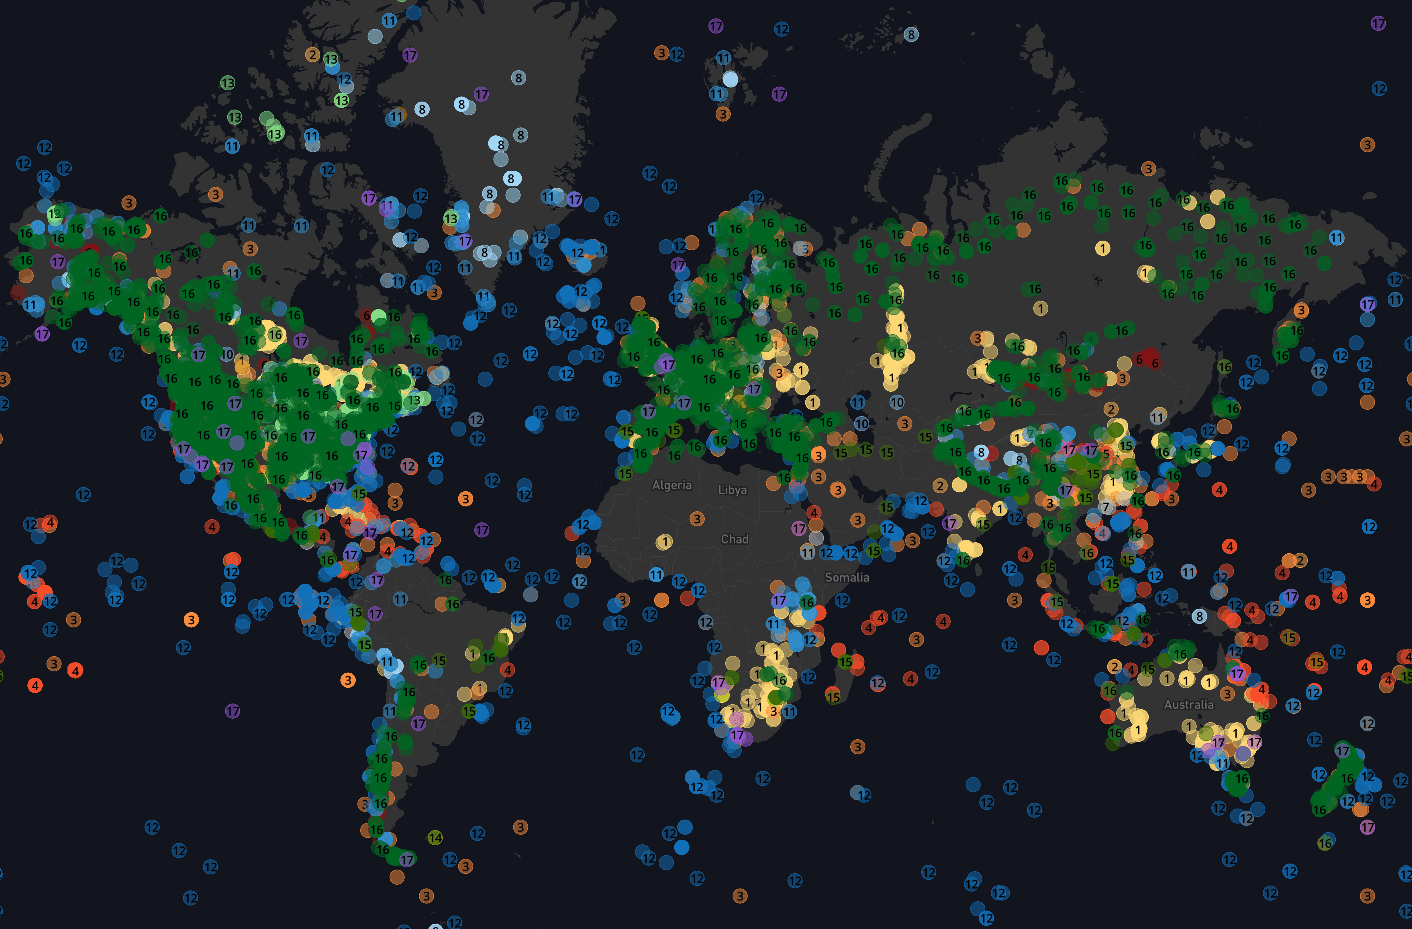 https://interactive.carbonbrief.org/how-proxy-data-reveals-climate-of-earths-distant-past/assets/img/map-jump.png